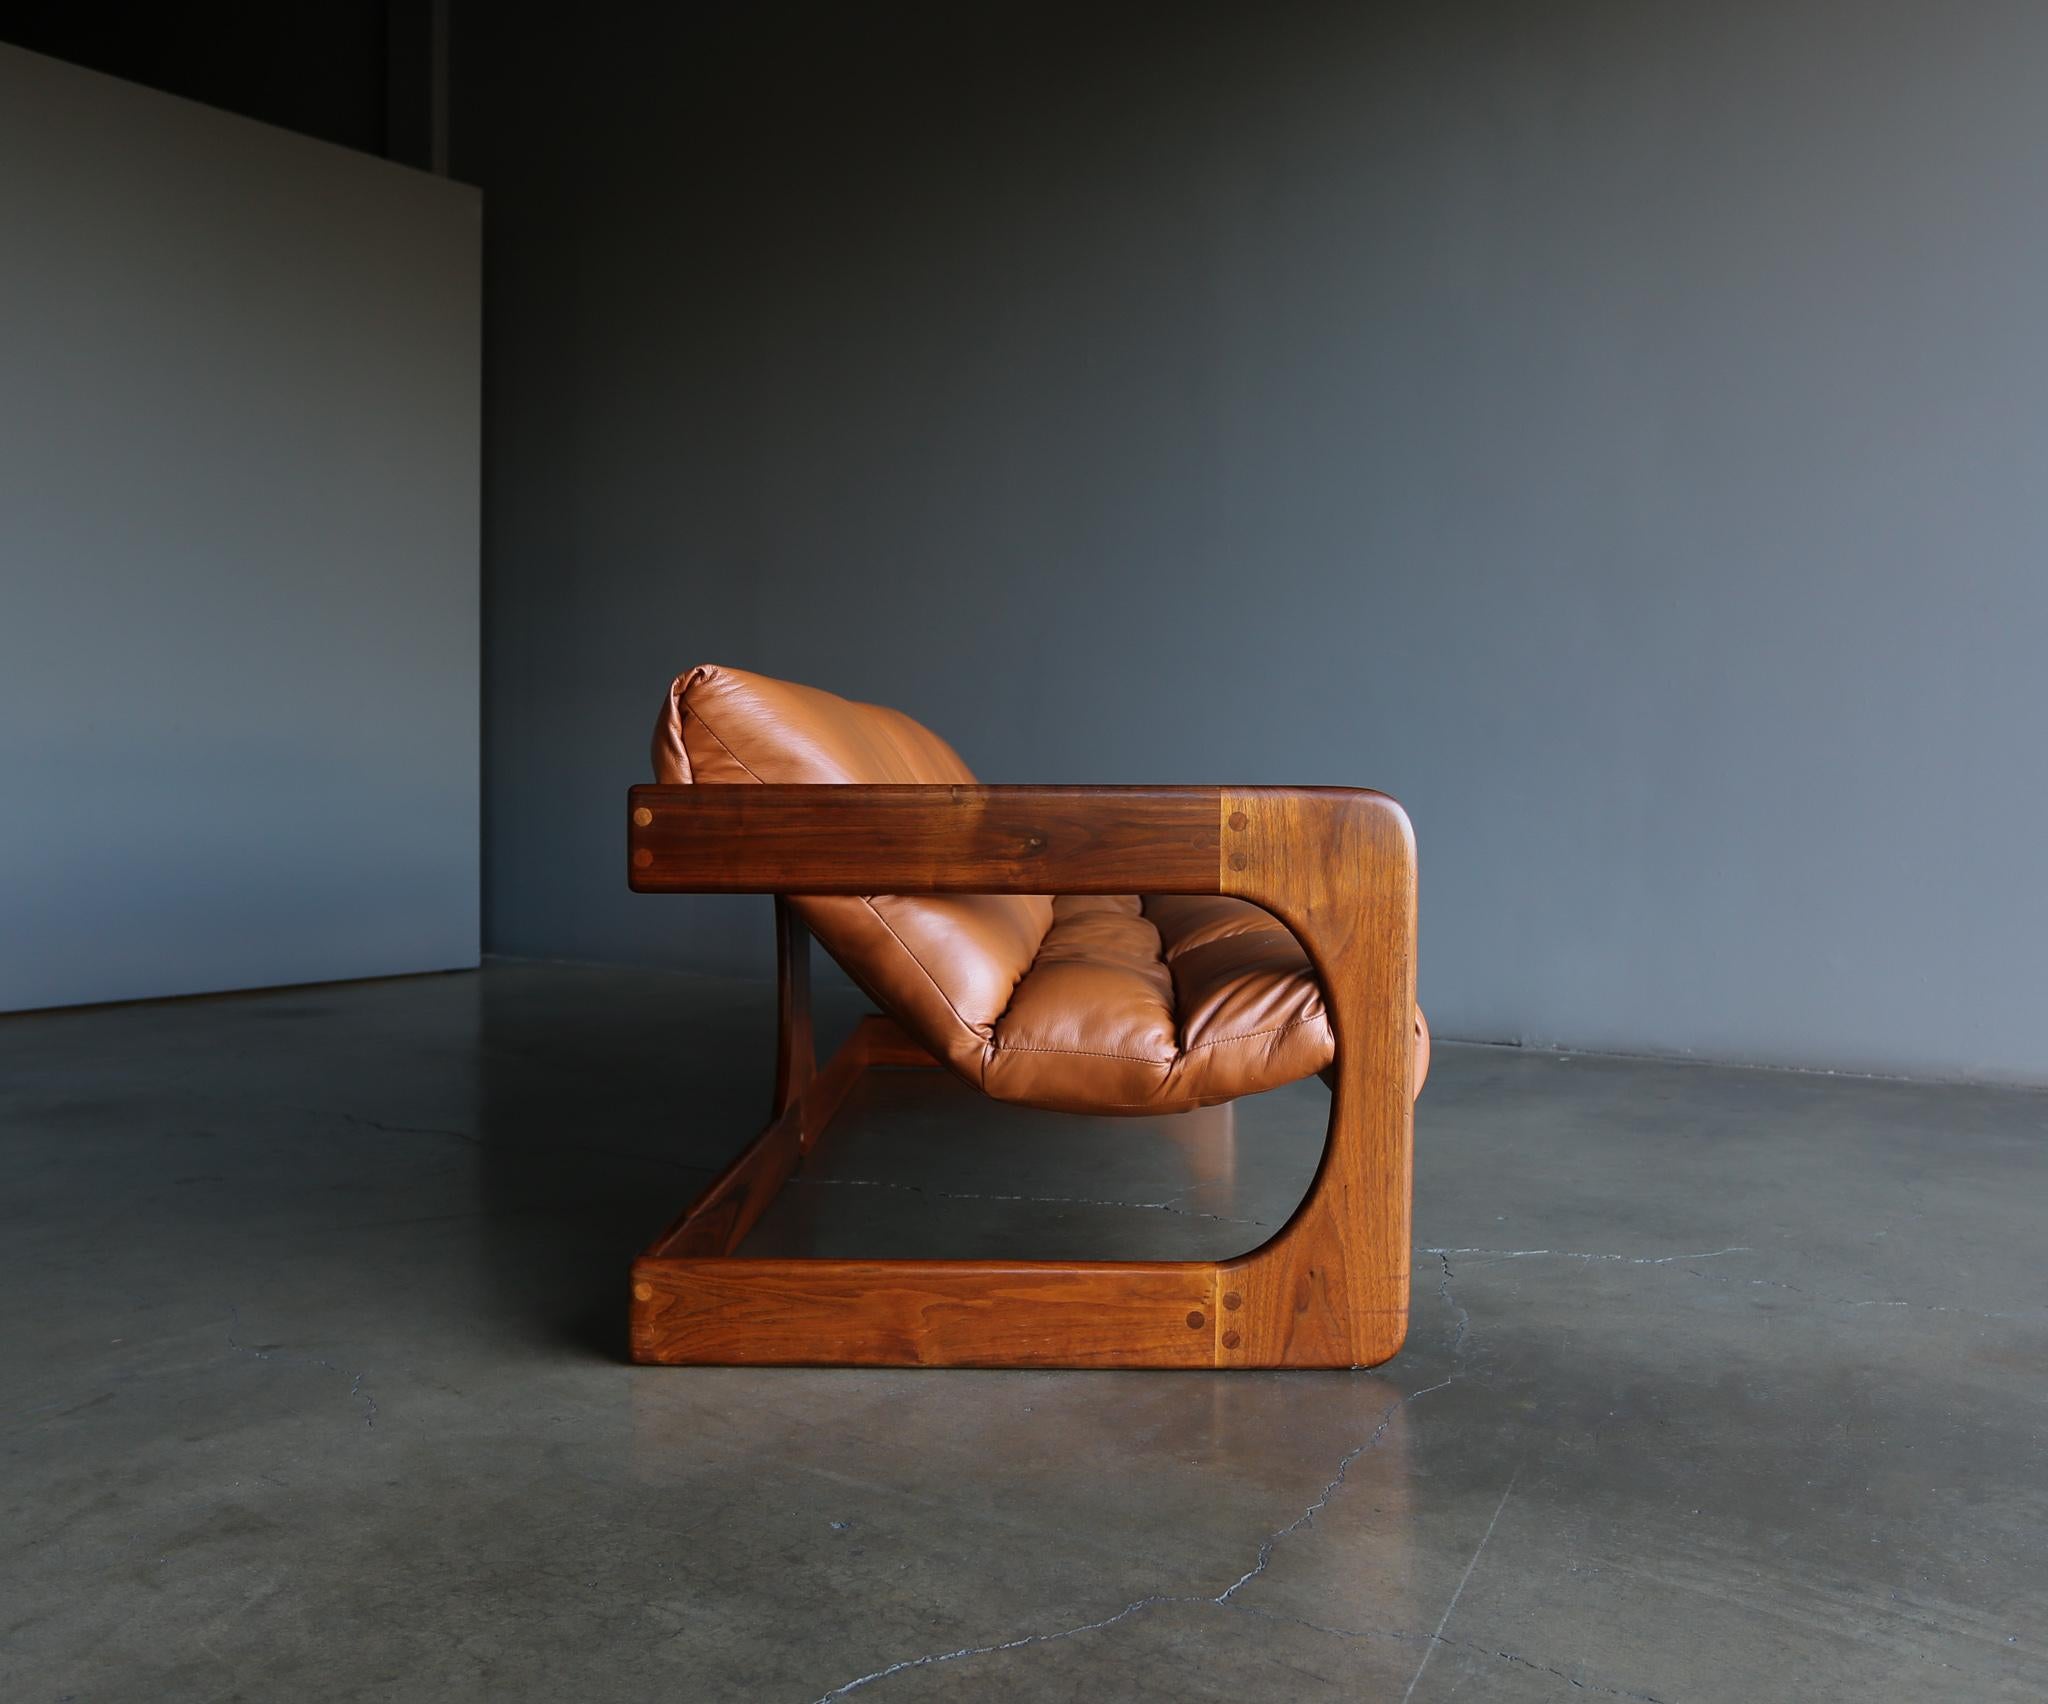 Lou Hodges walnut and leather sofa for California Design Group, 1970s.